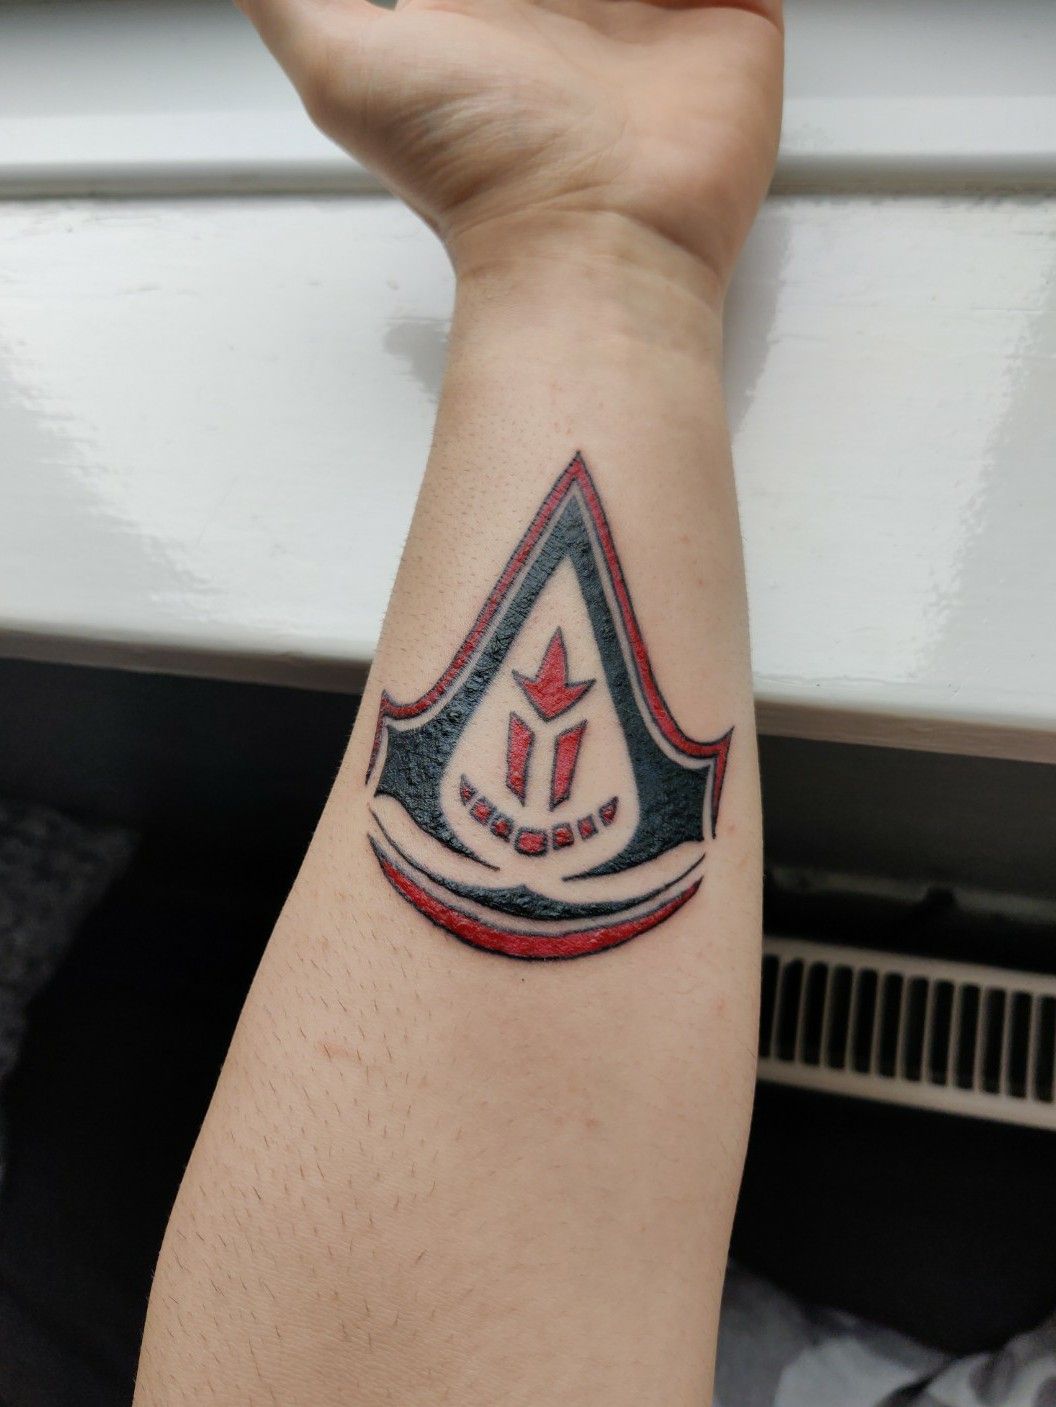 Tattoo uploaded by Jay Red  My first tattoo Assassins creed logo with my  own insignia on the inner section I want this tattoo to connect with other  tribal based tattoos on